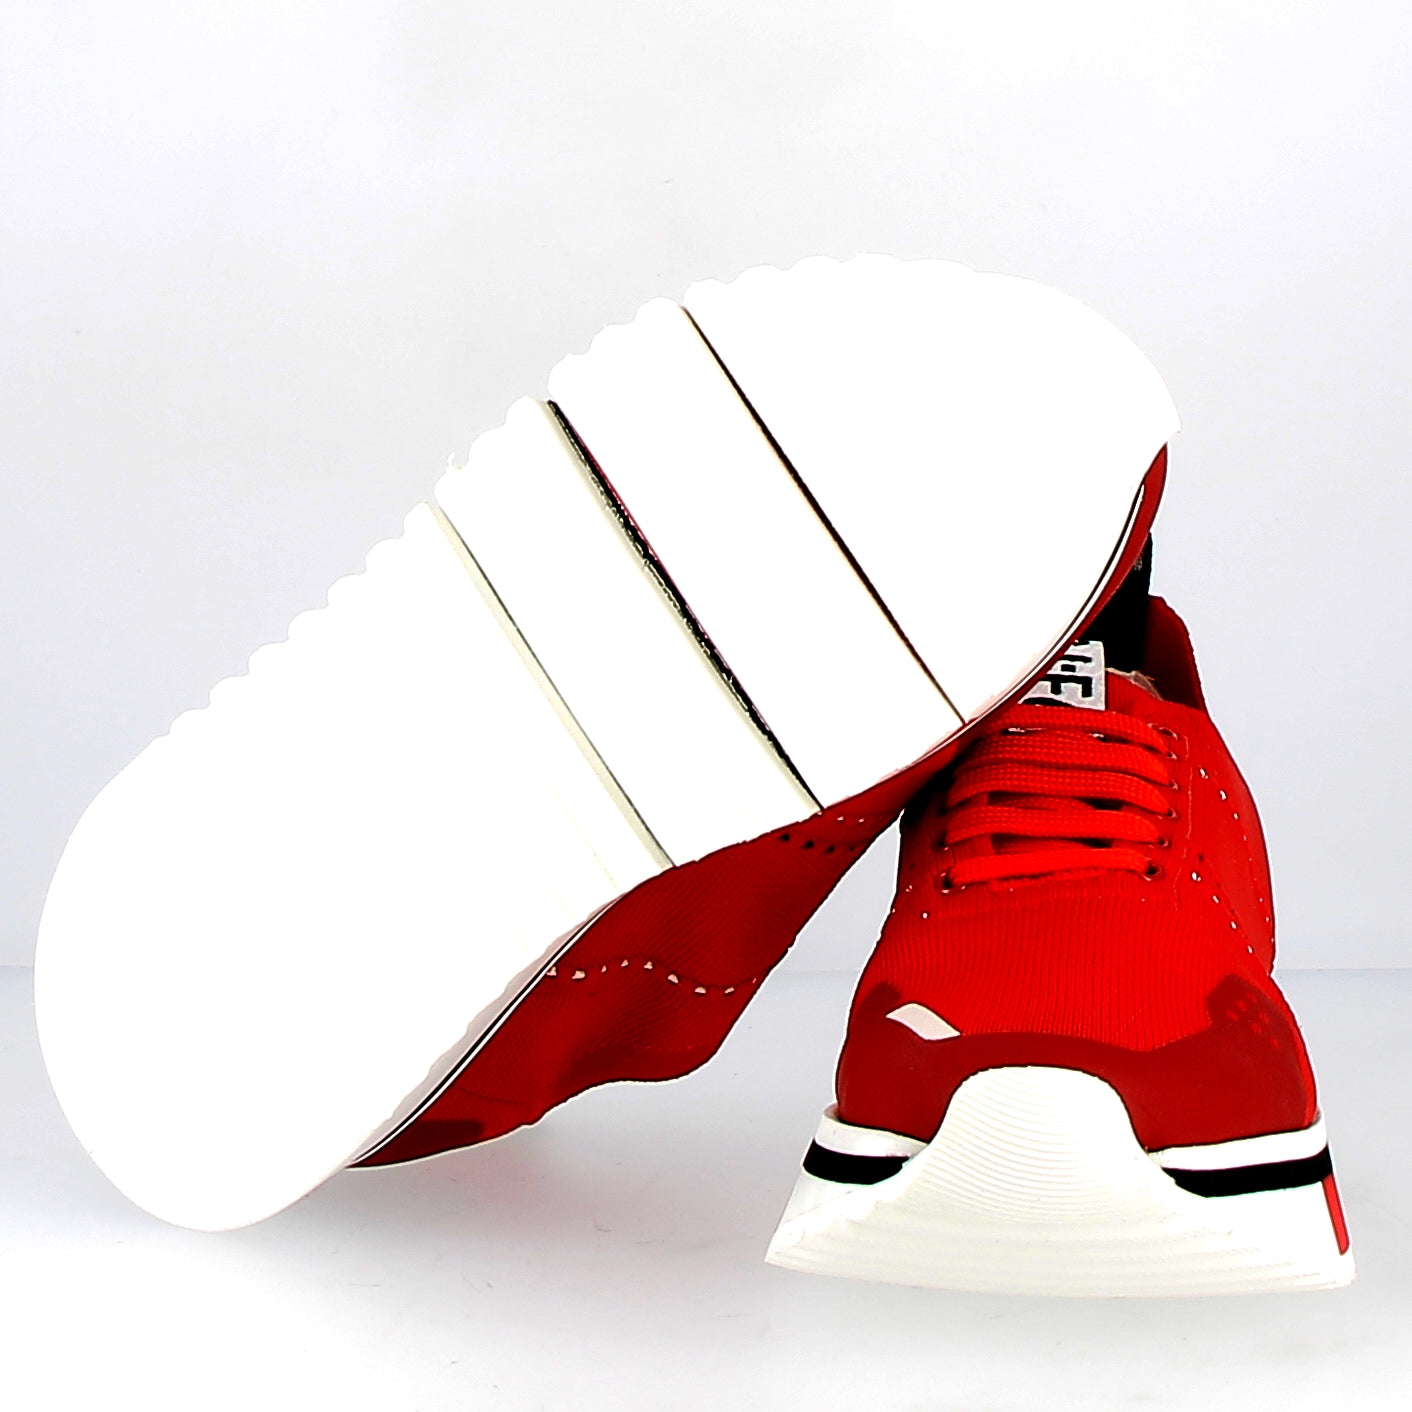 red elastic texture sneaker with flex sole